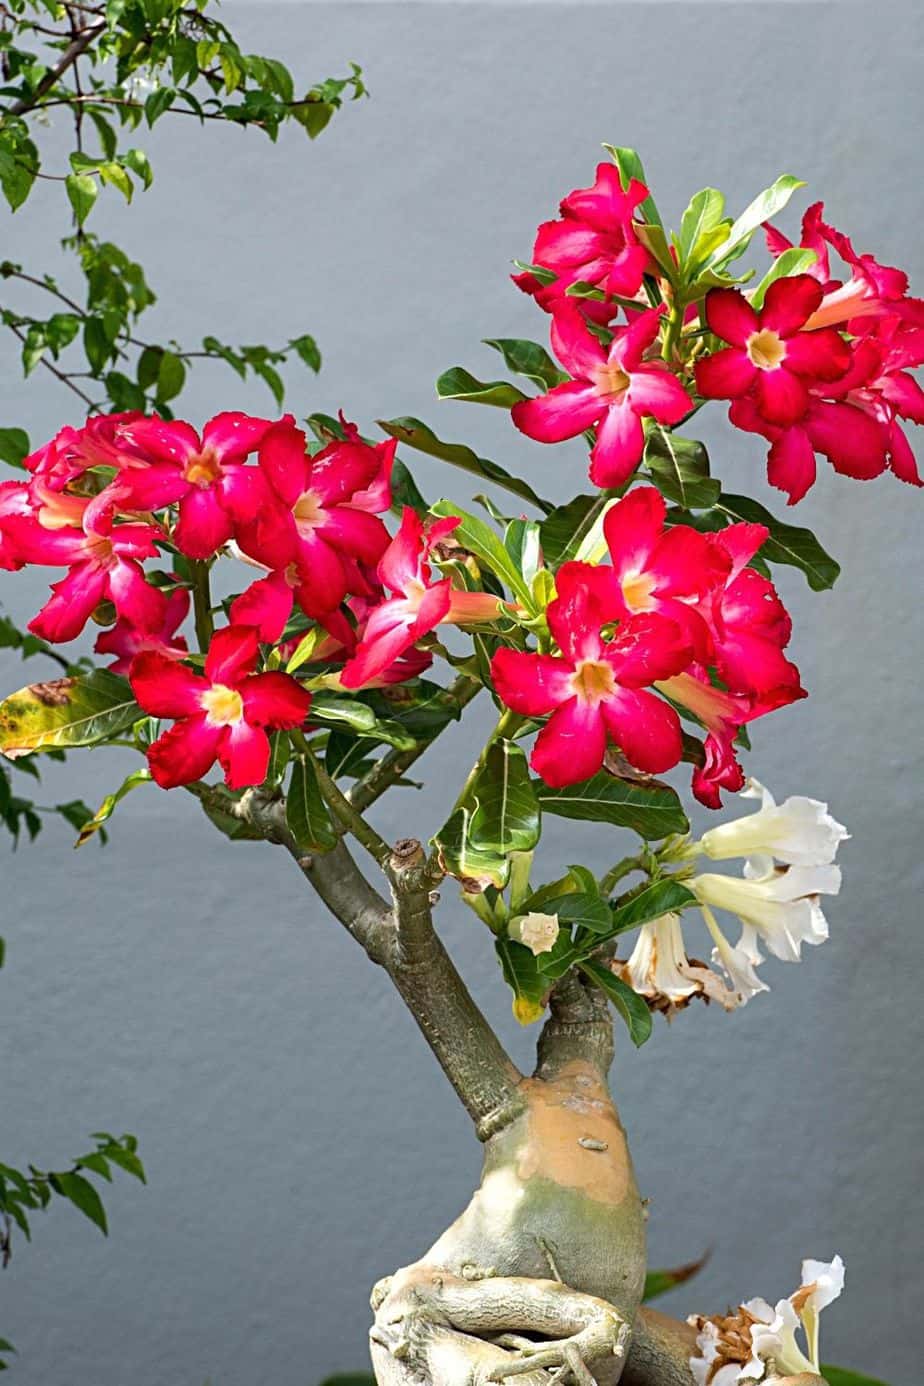 Desert Rose, despite its beauty, should be kept away from pets and children when grown on your east-facing balcony